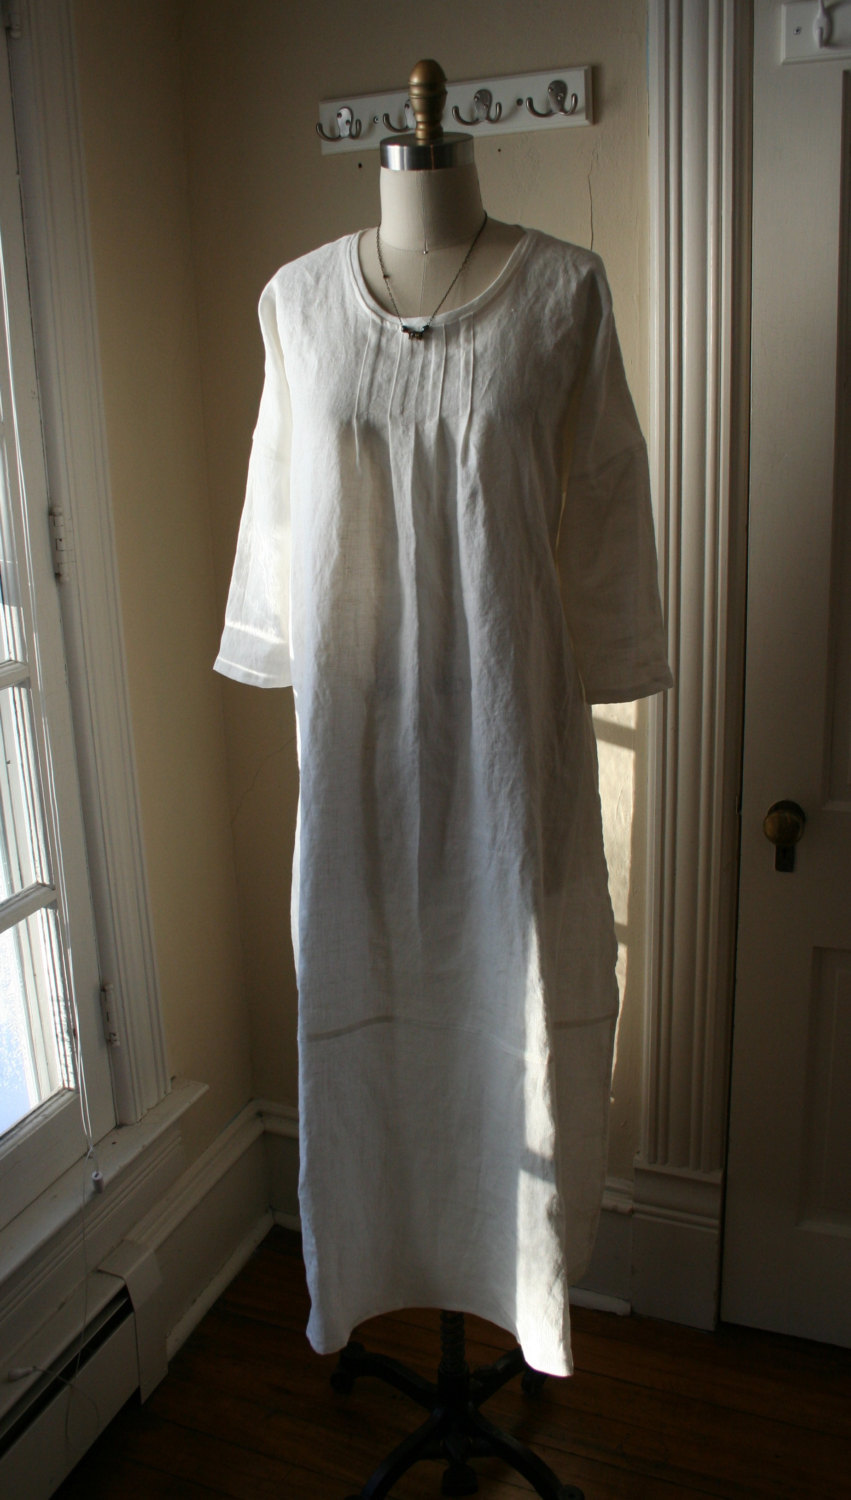 Beth, Vintage Inspired Heirloom White Linen Nancy Nightgown by Breathe Sleepwear. This lovely year-round...